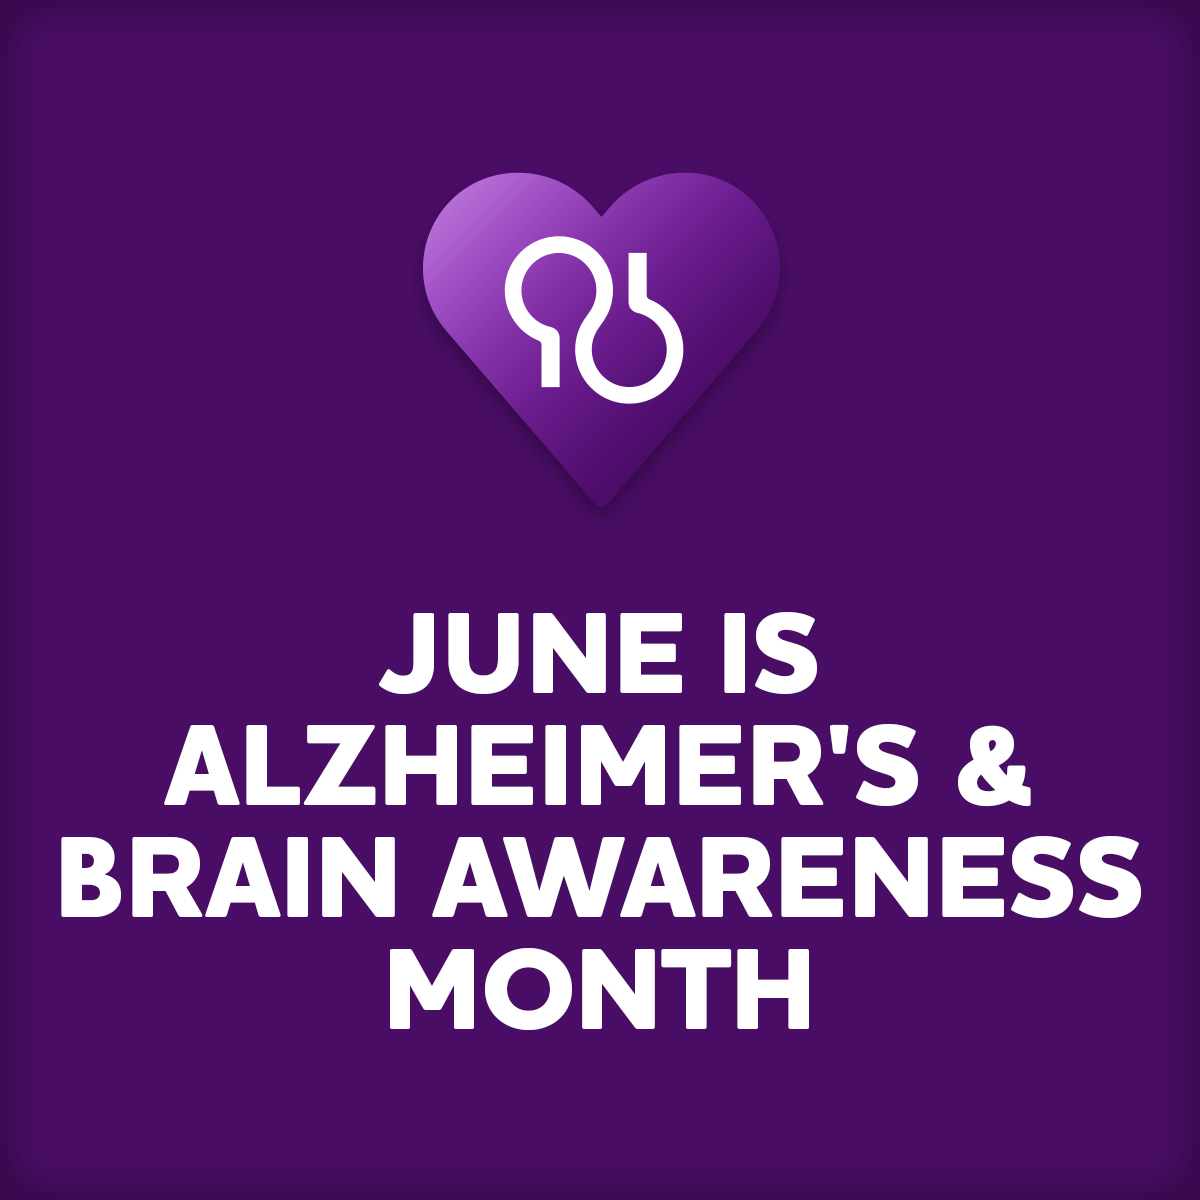 June is Alzheimer’s & Brain Awareness Month! #GoPurple to raise awareness in honor of the more than 6 million Americans living with Alzheimer’s. Learn more: alz.org/abam. #ENDALZ